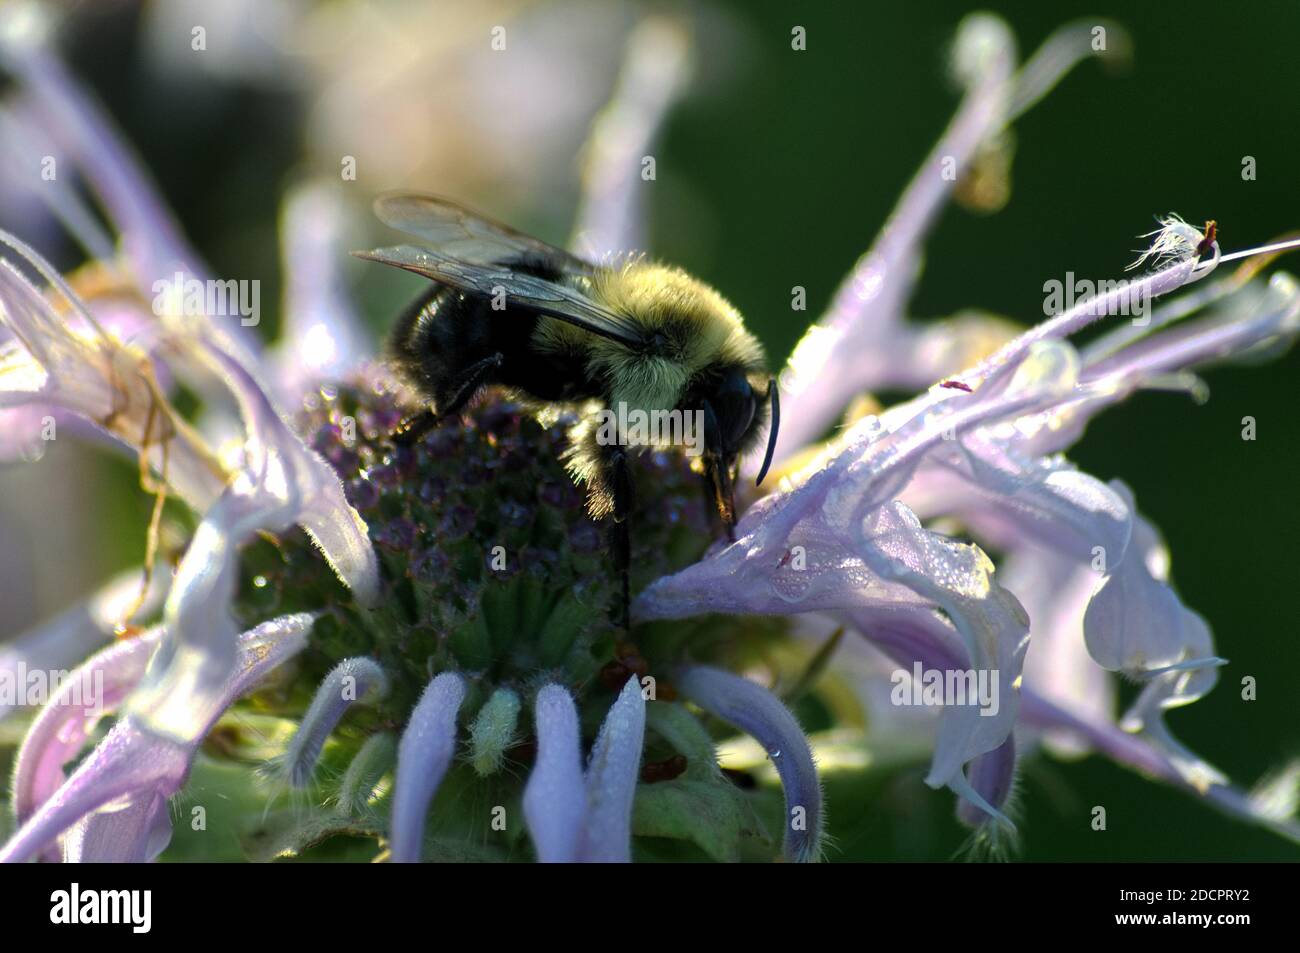 An Eastern Bumble Bee pollinating a purple Bee Balm flower Stock Photo